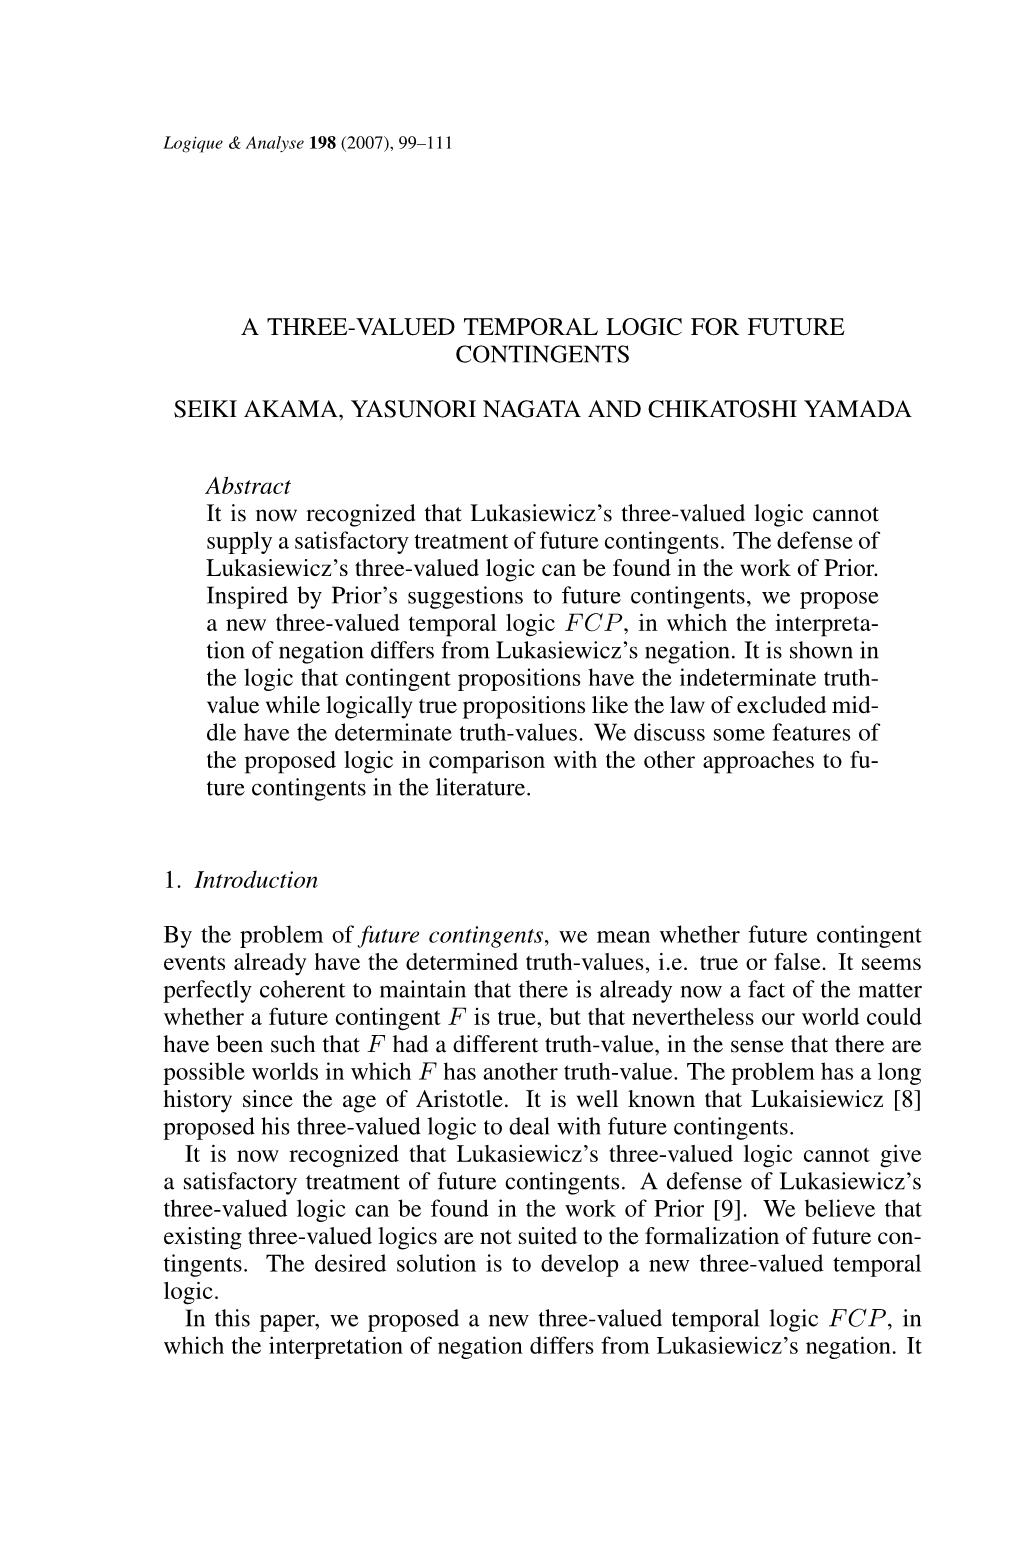 Page 99 a THREE-VALUED TEMPORAL LOGIC for FUTURE